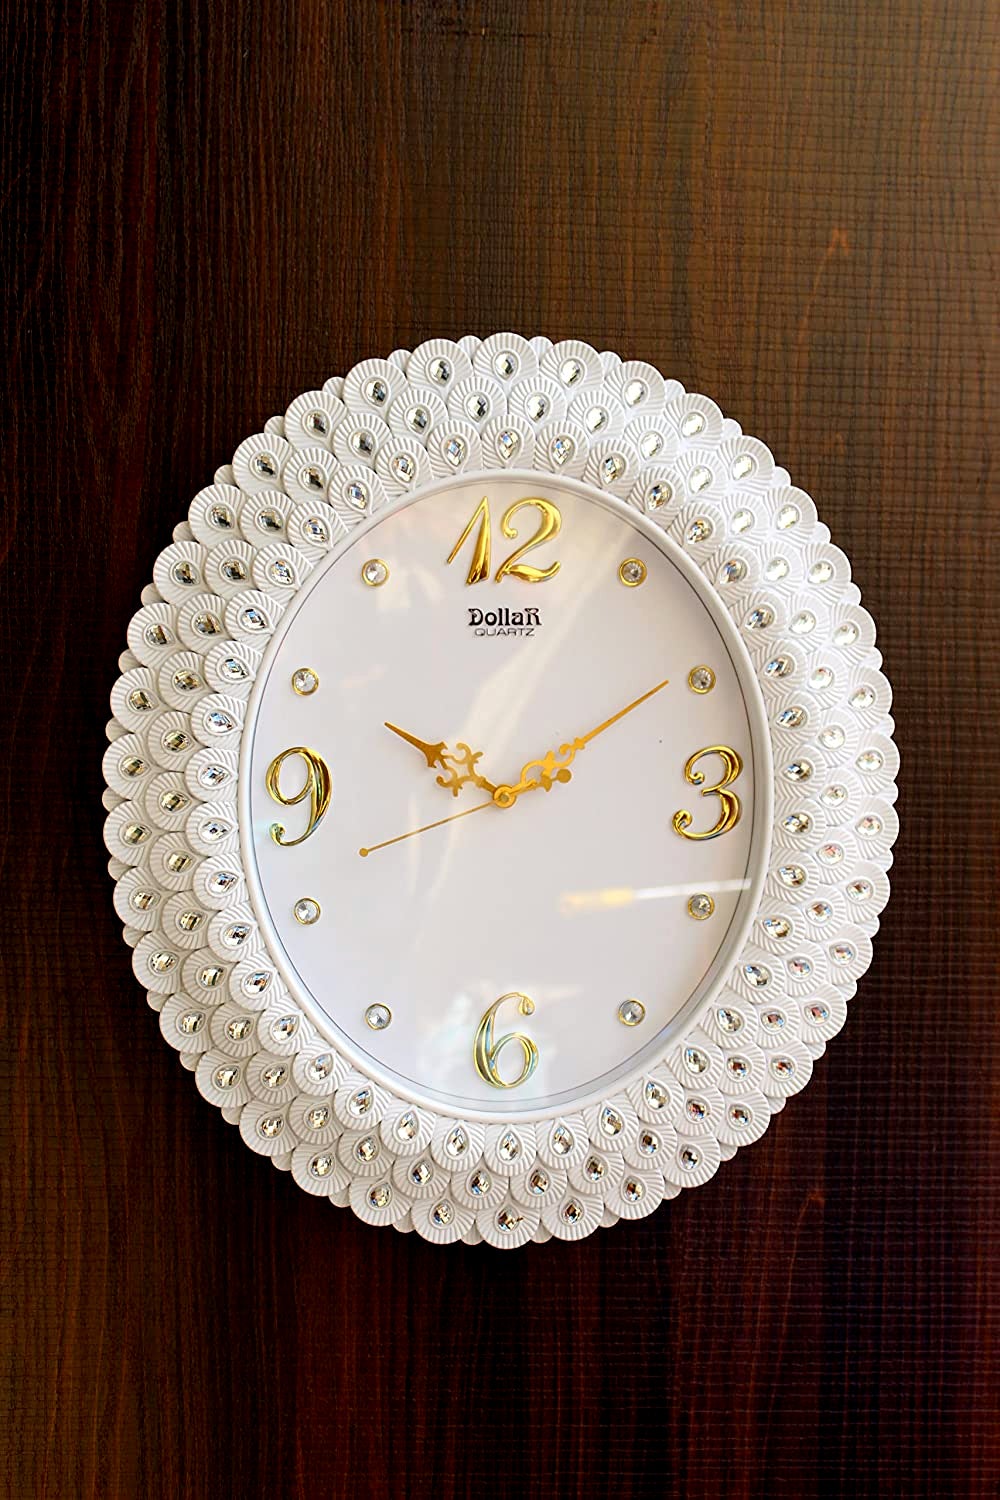 FunkyTradition Royal Pearl Diamond White Wall Clock, Wall Watch, Wall Decor for Home Office Decor and Gifts 47 cm Tall